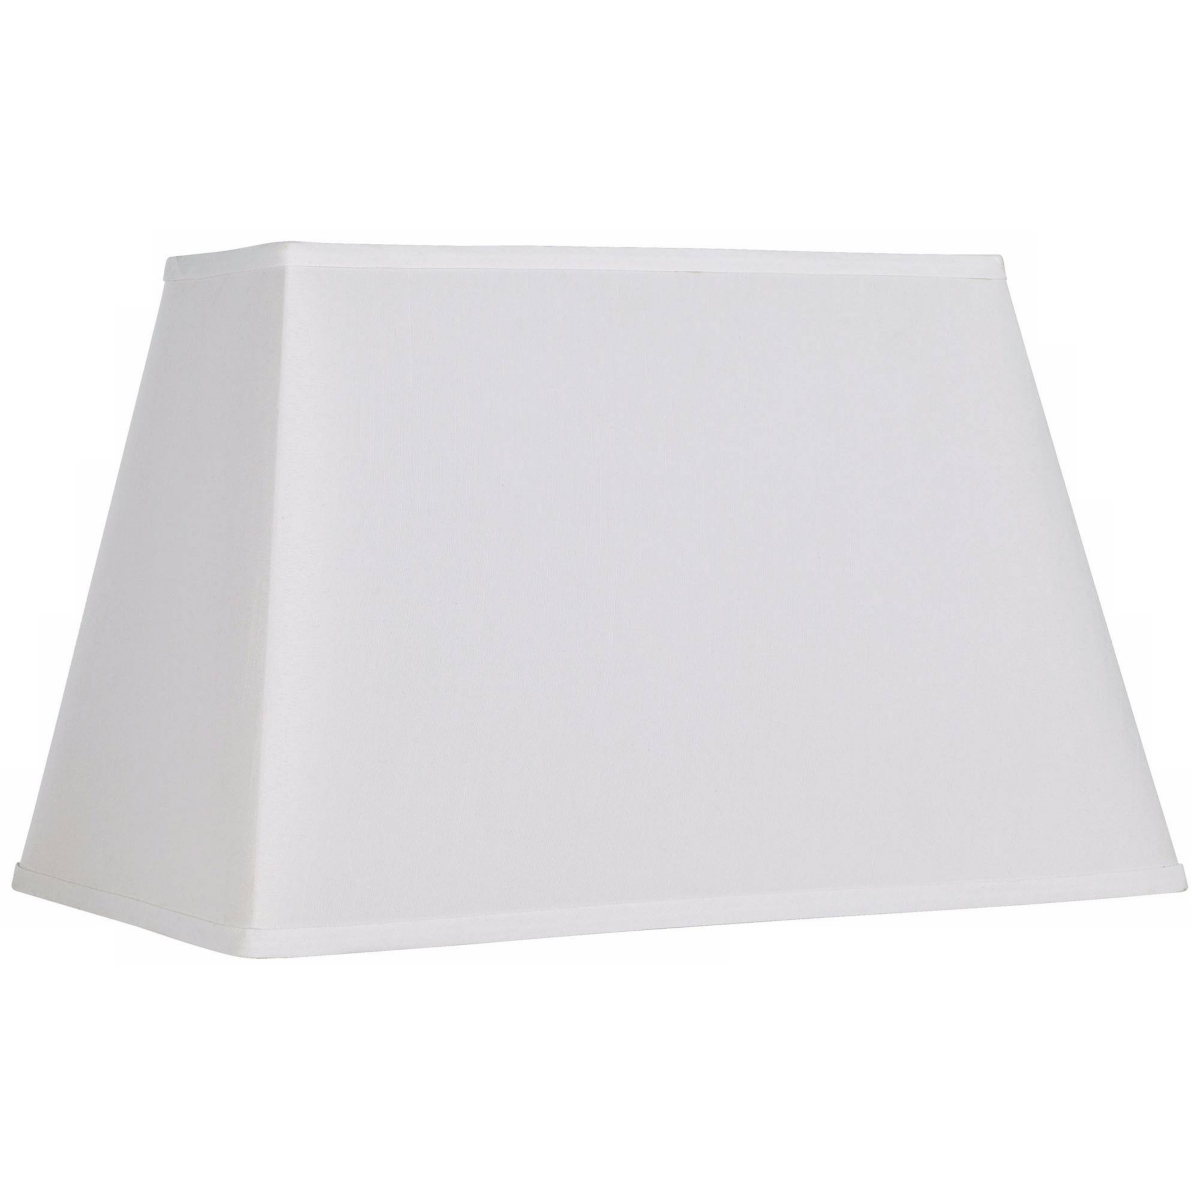 Springcrest White Large Rectangular Lamp Shade 14" Wide X 6" Deep At Top And 18" Wide X 12" Deep At Bottom And 1